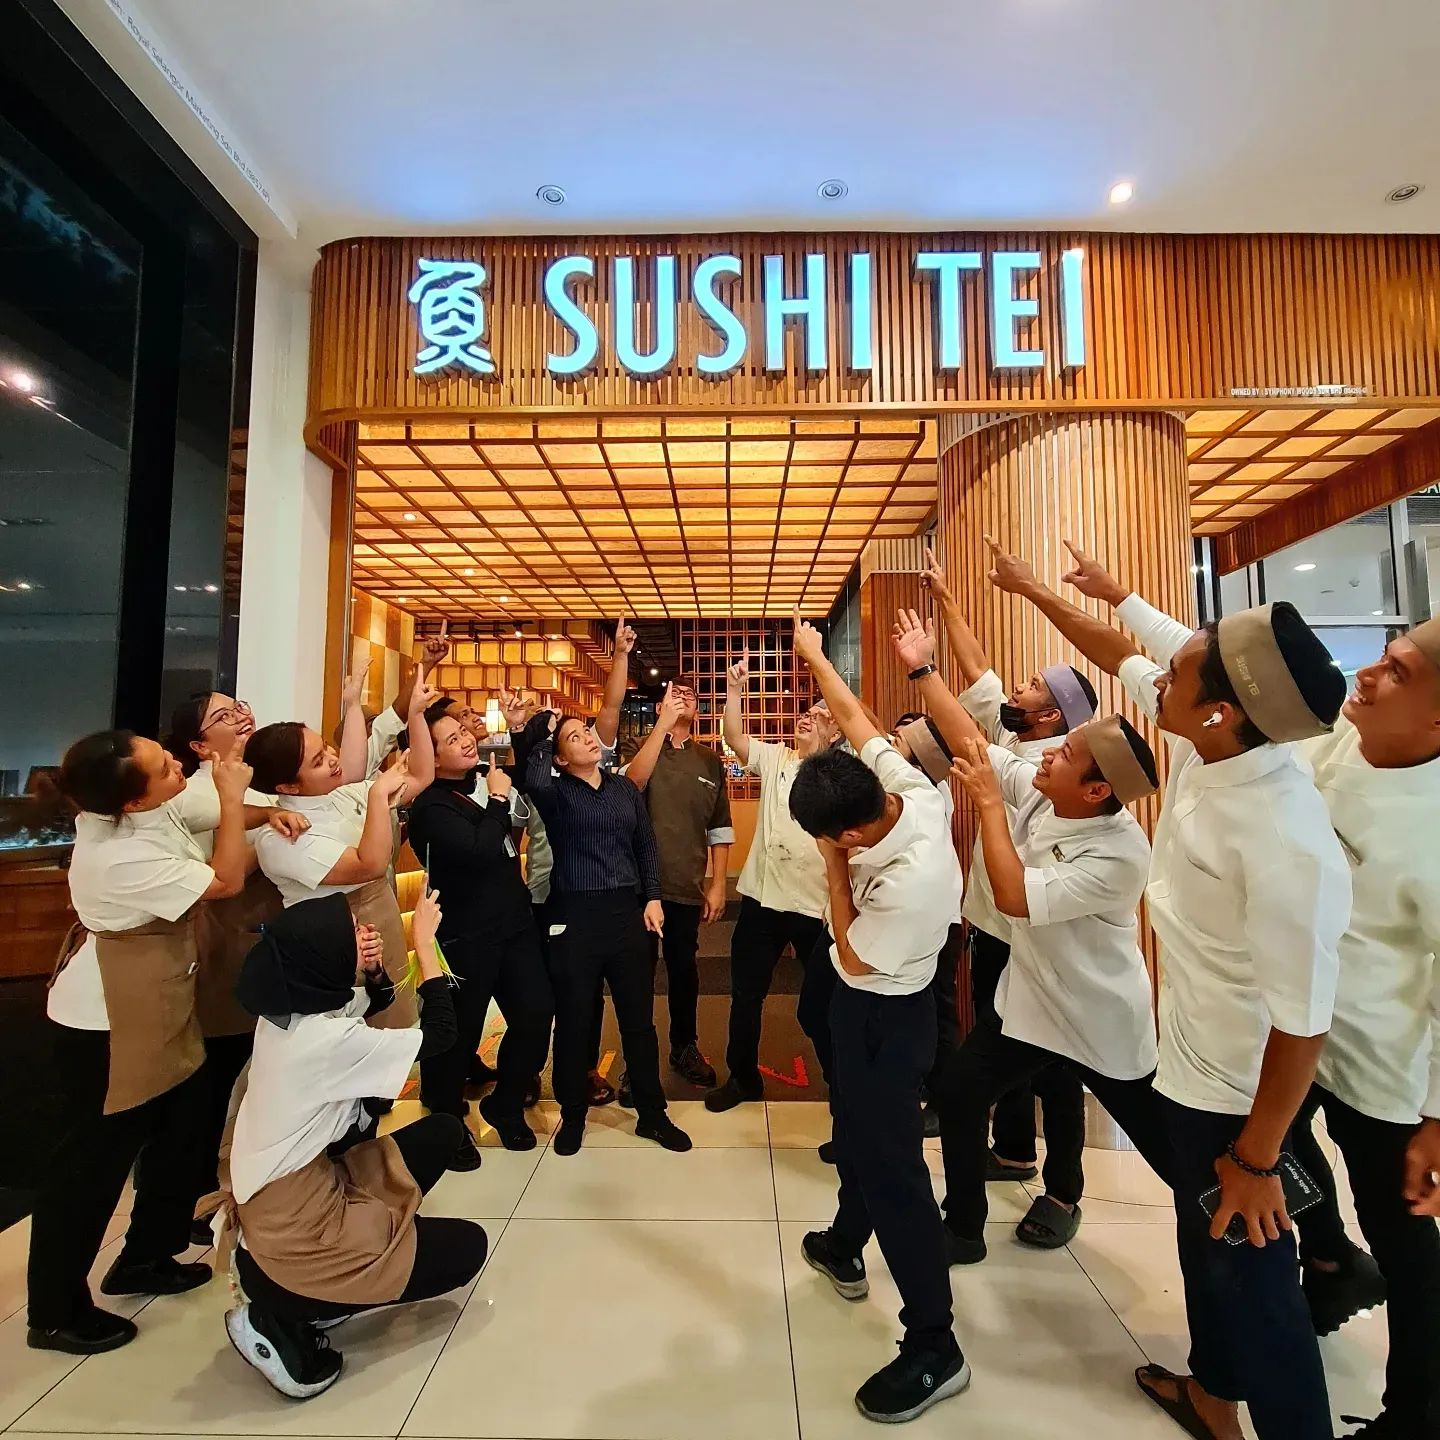 Sushi tei abruptly ceases operations in malaysia, much to the shock of netizens